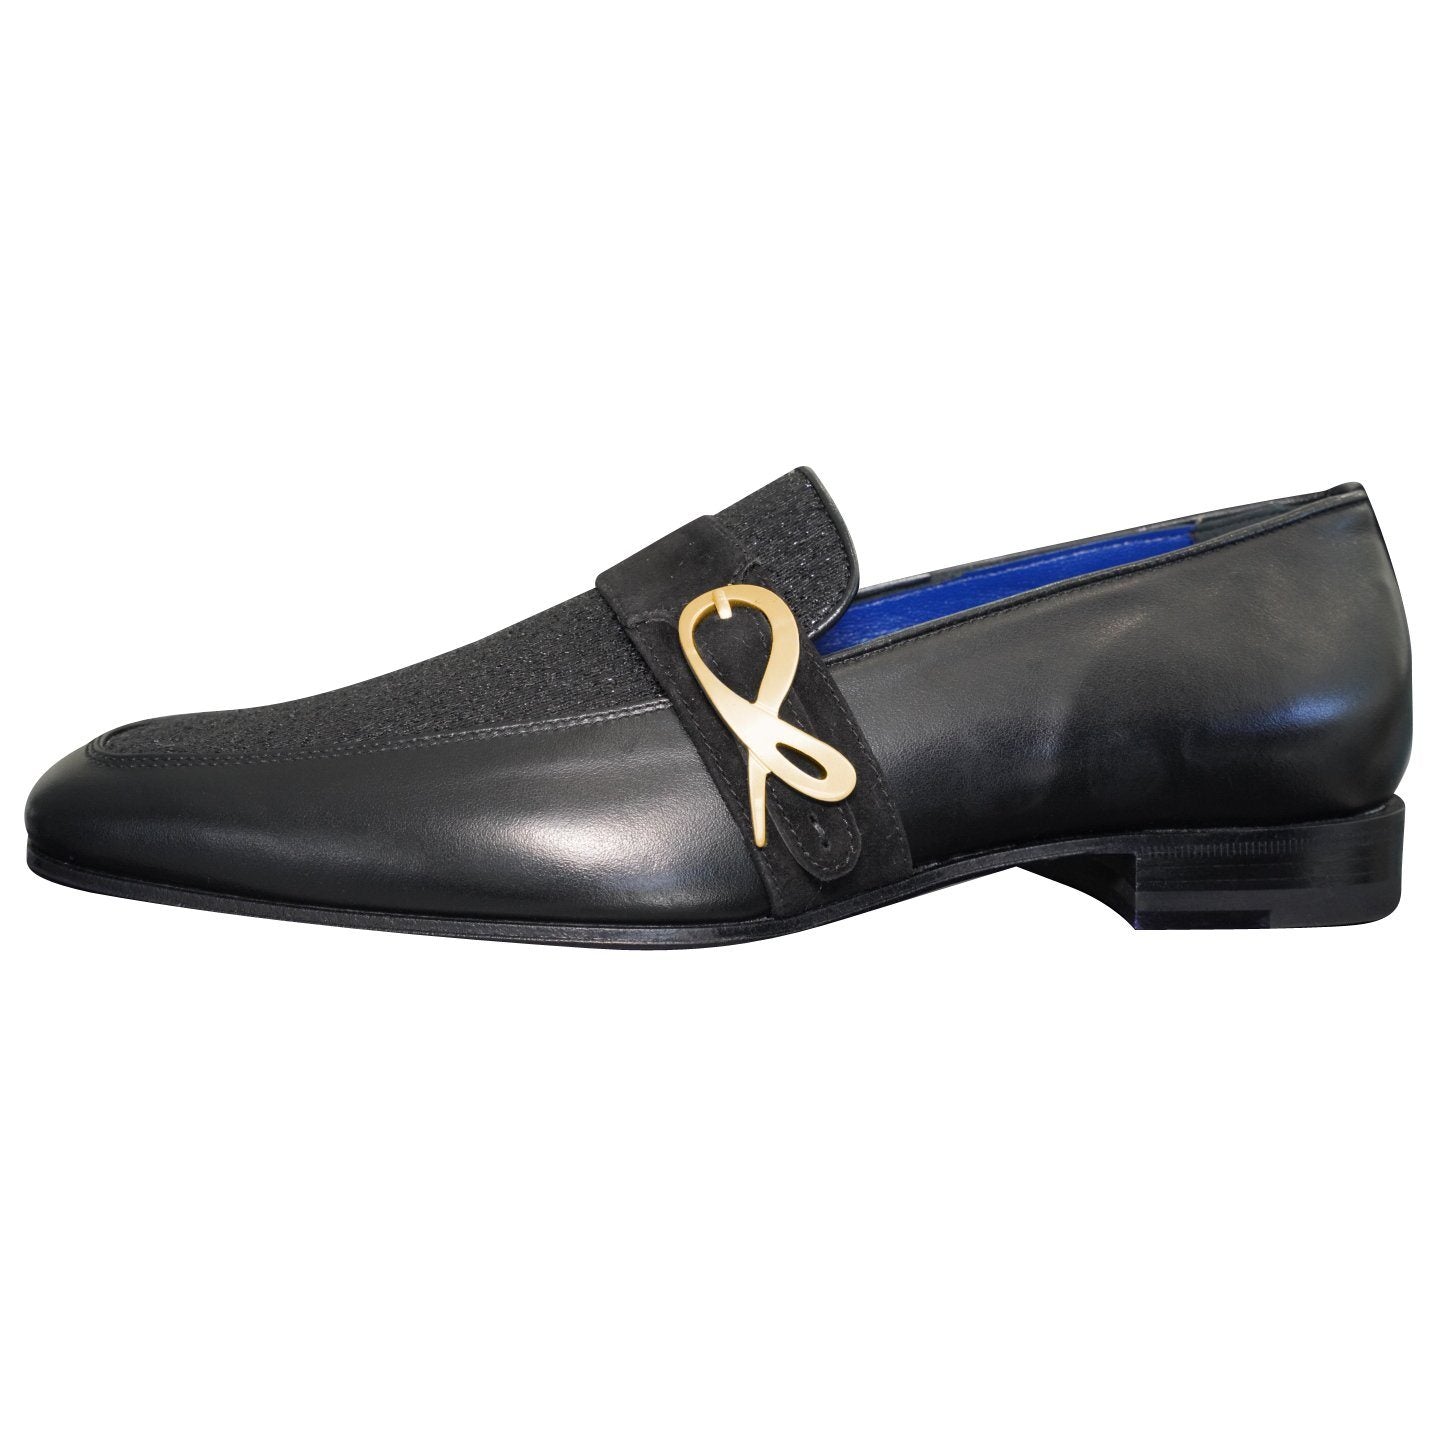 Black Diamante Leather Monk Gold Loafer